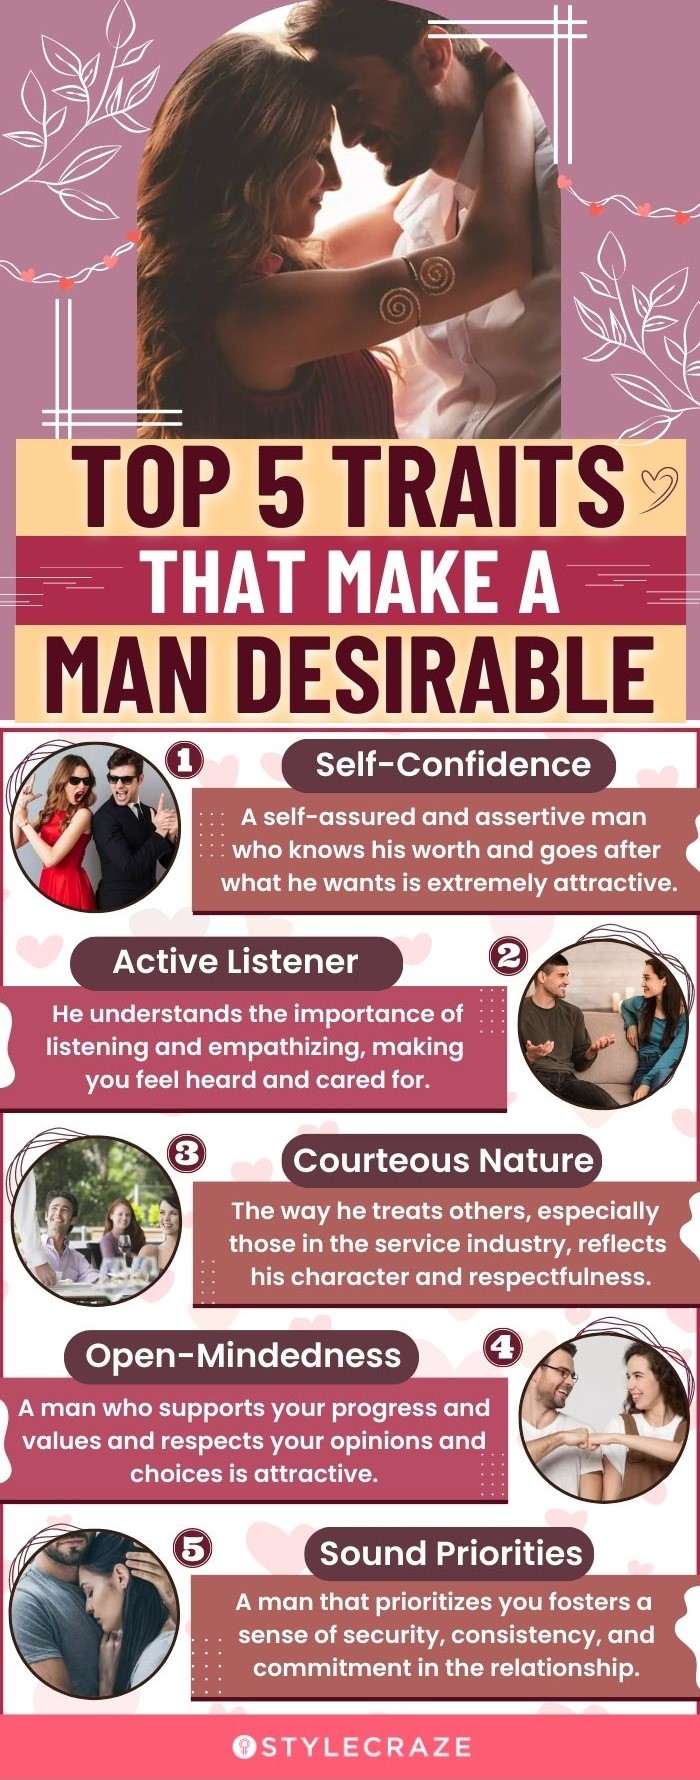 top 5 traits that make a man desirable(infographic)